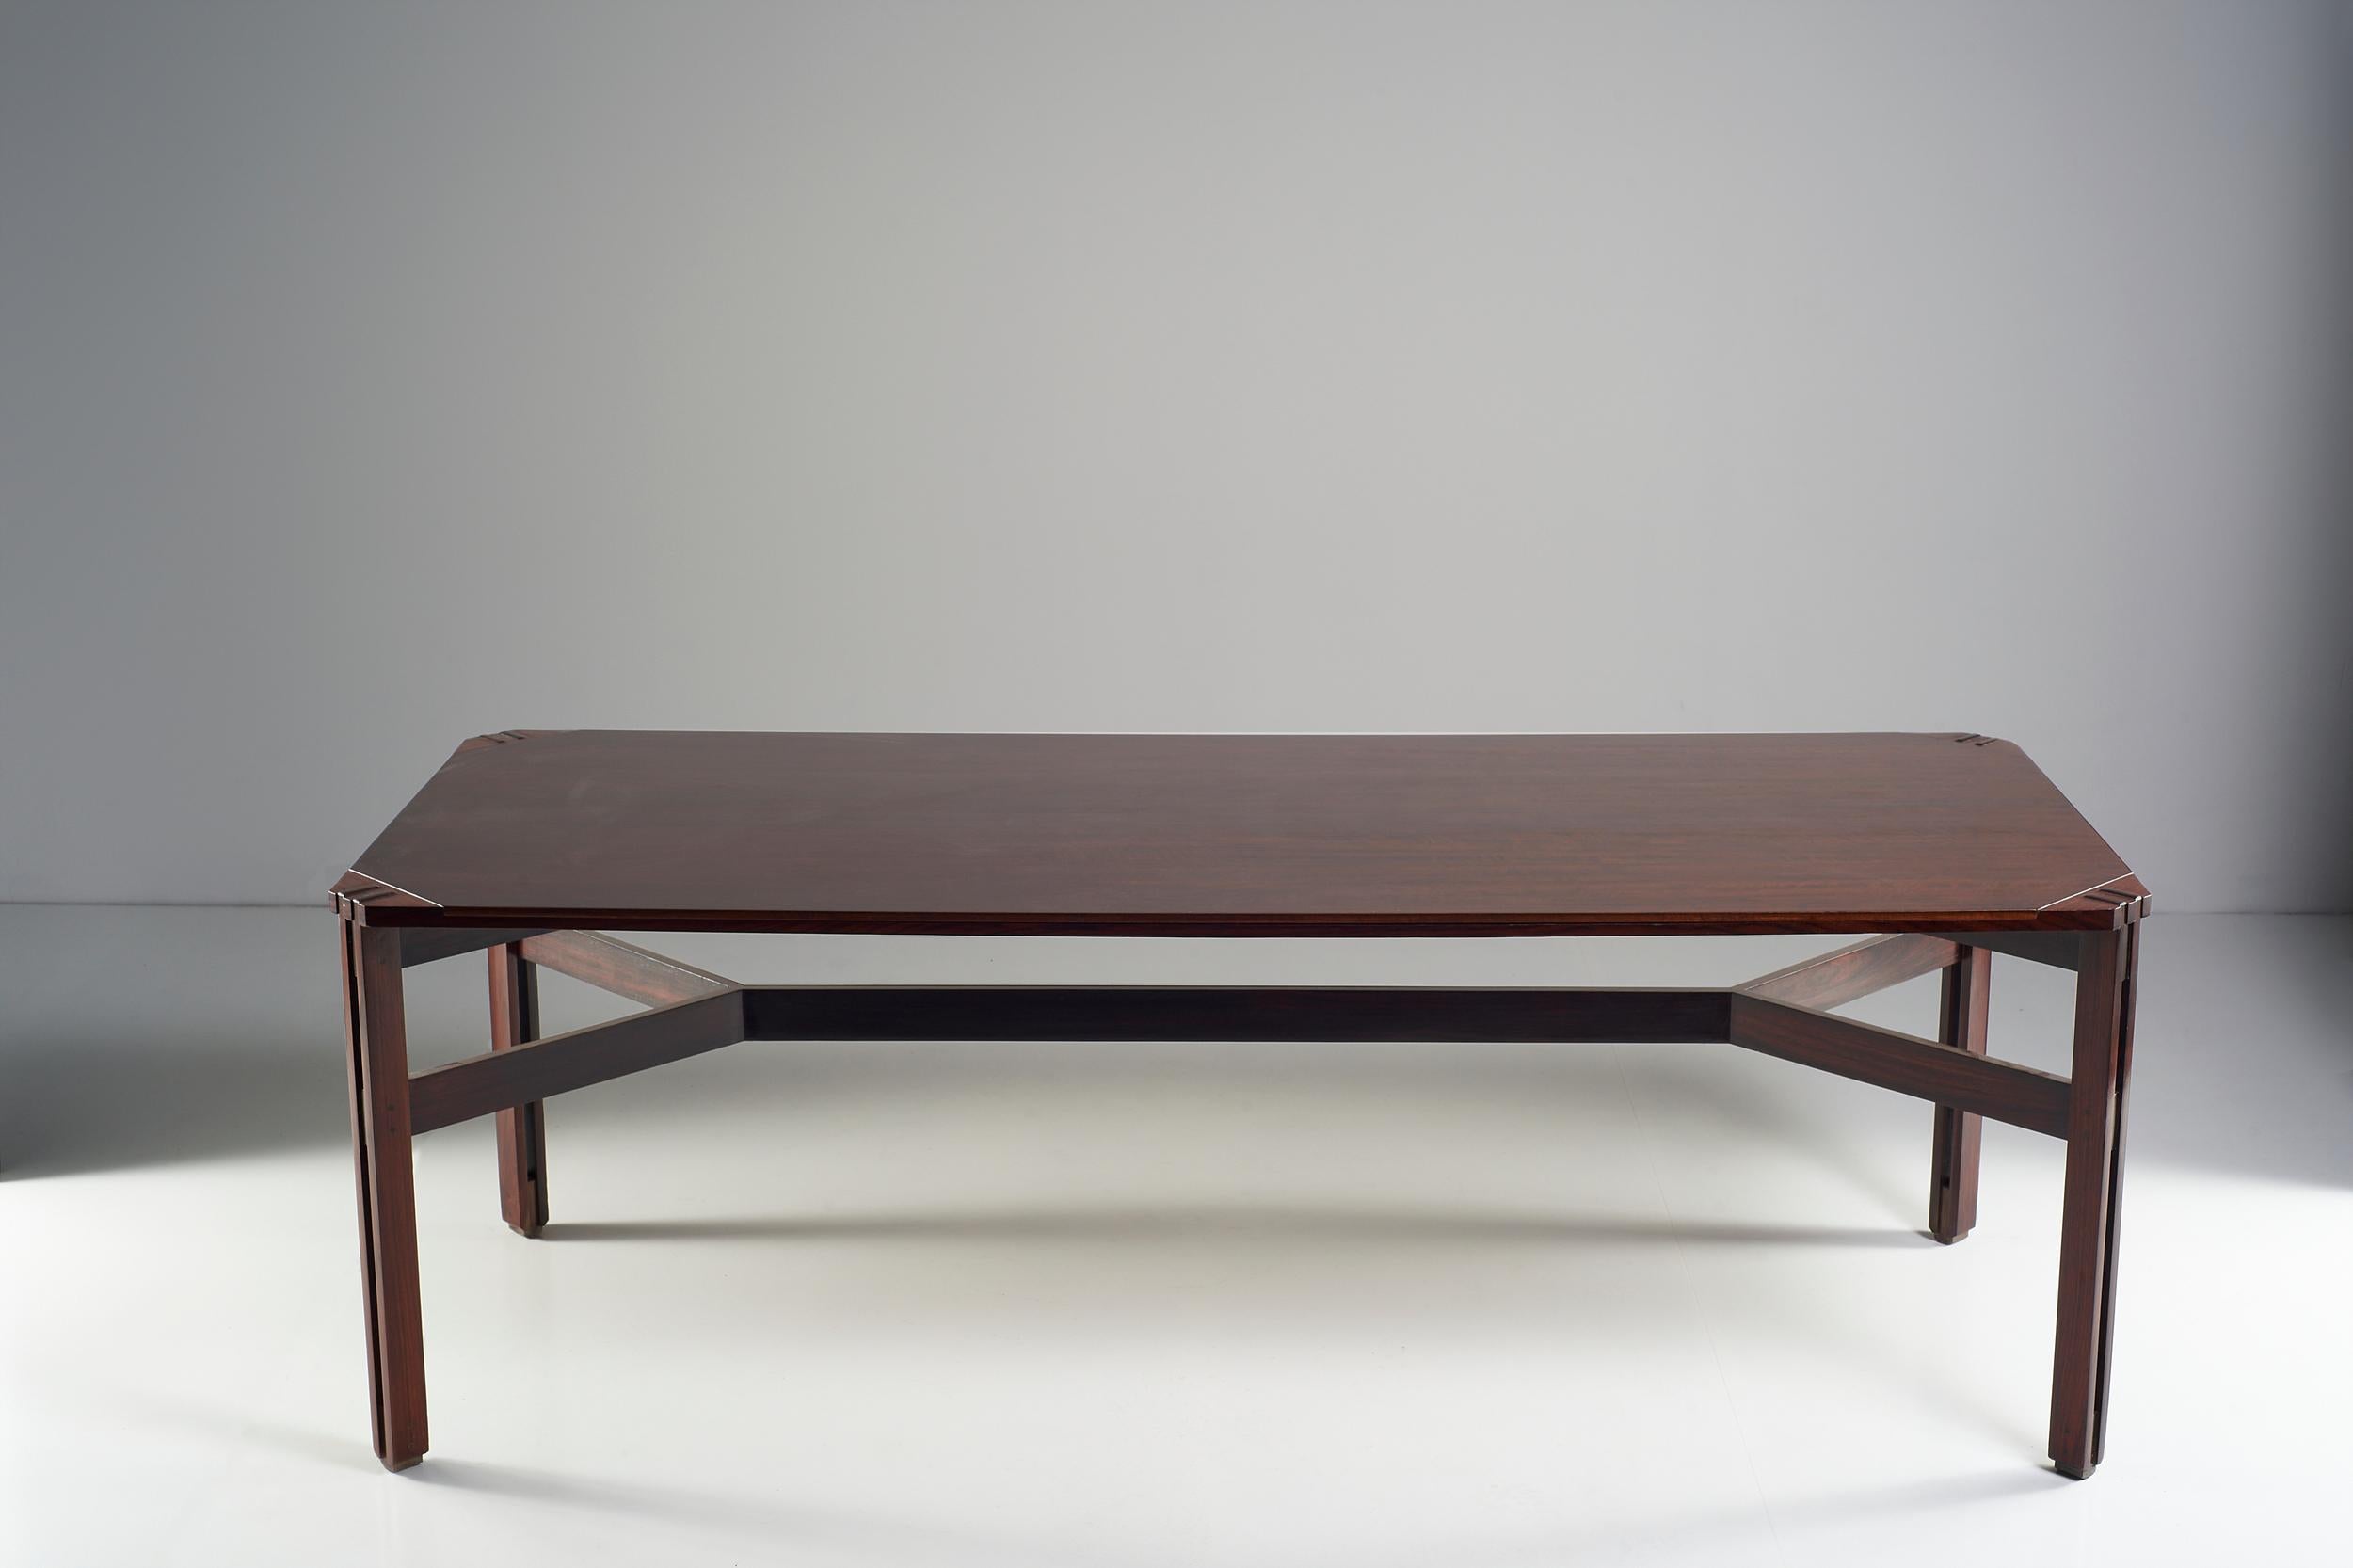 The particularity of this extraordinary table lies in the construction of the legs and corners of the top. The uniformity of these joints lies in the space created between the lower central support and the legs: the legs are divided into two